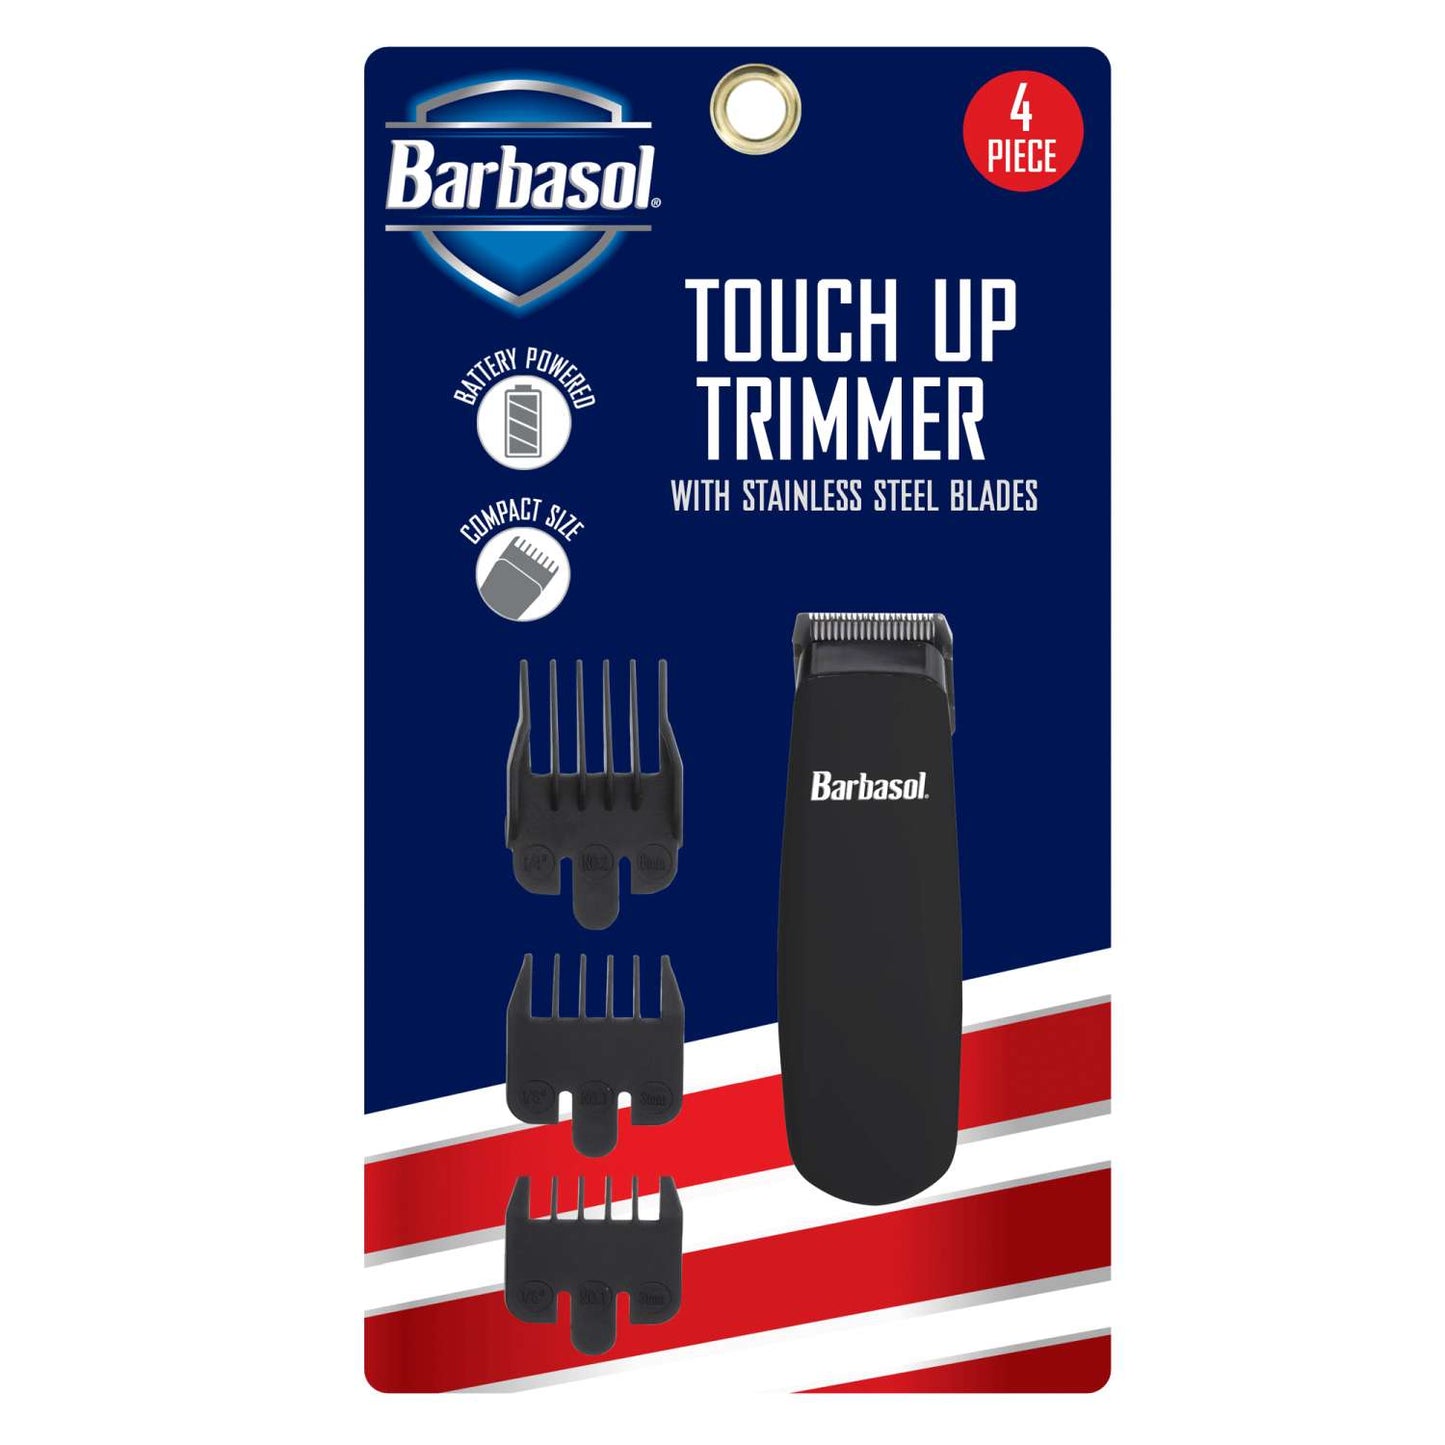 Barbasol Touch Up Trimmer Kit 4 Pieces